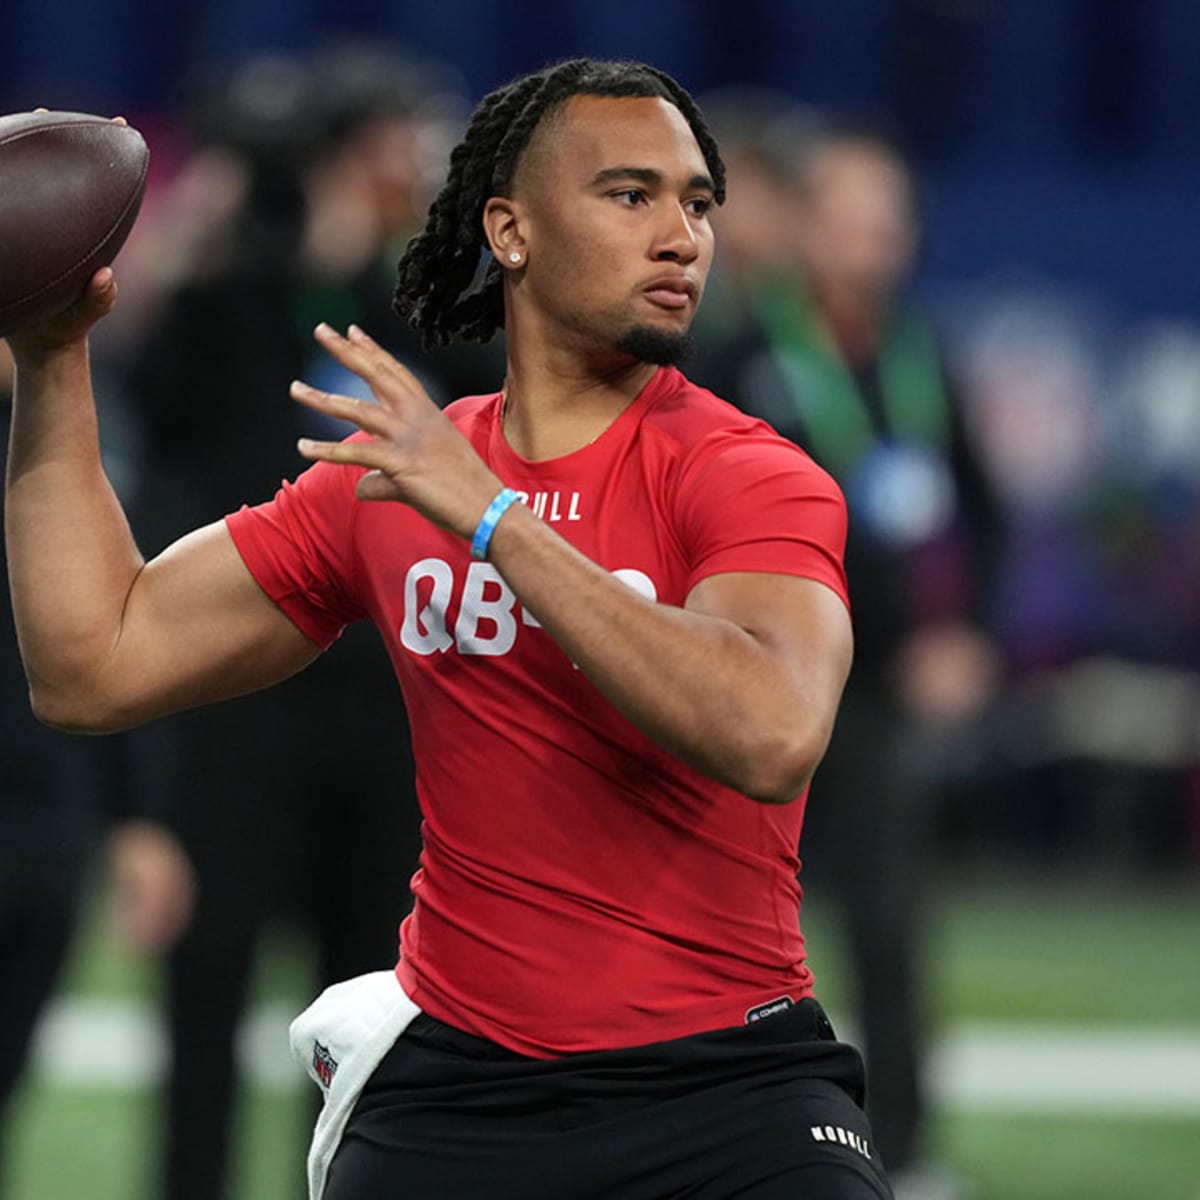 NFL combine takeaways: Three QBs set to surprise on draft day